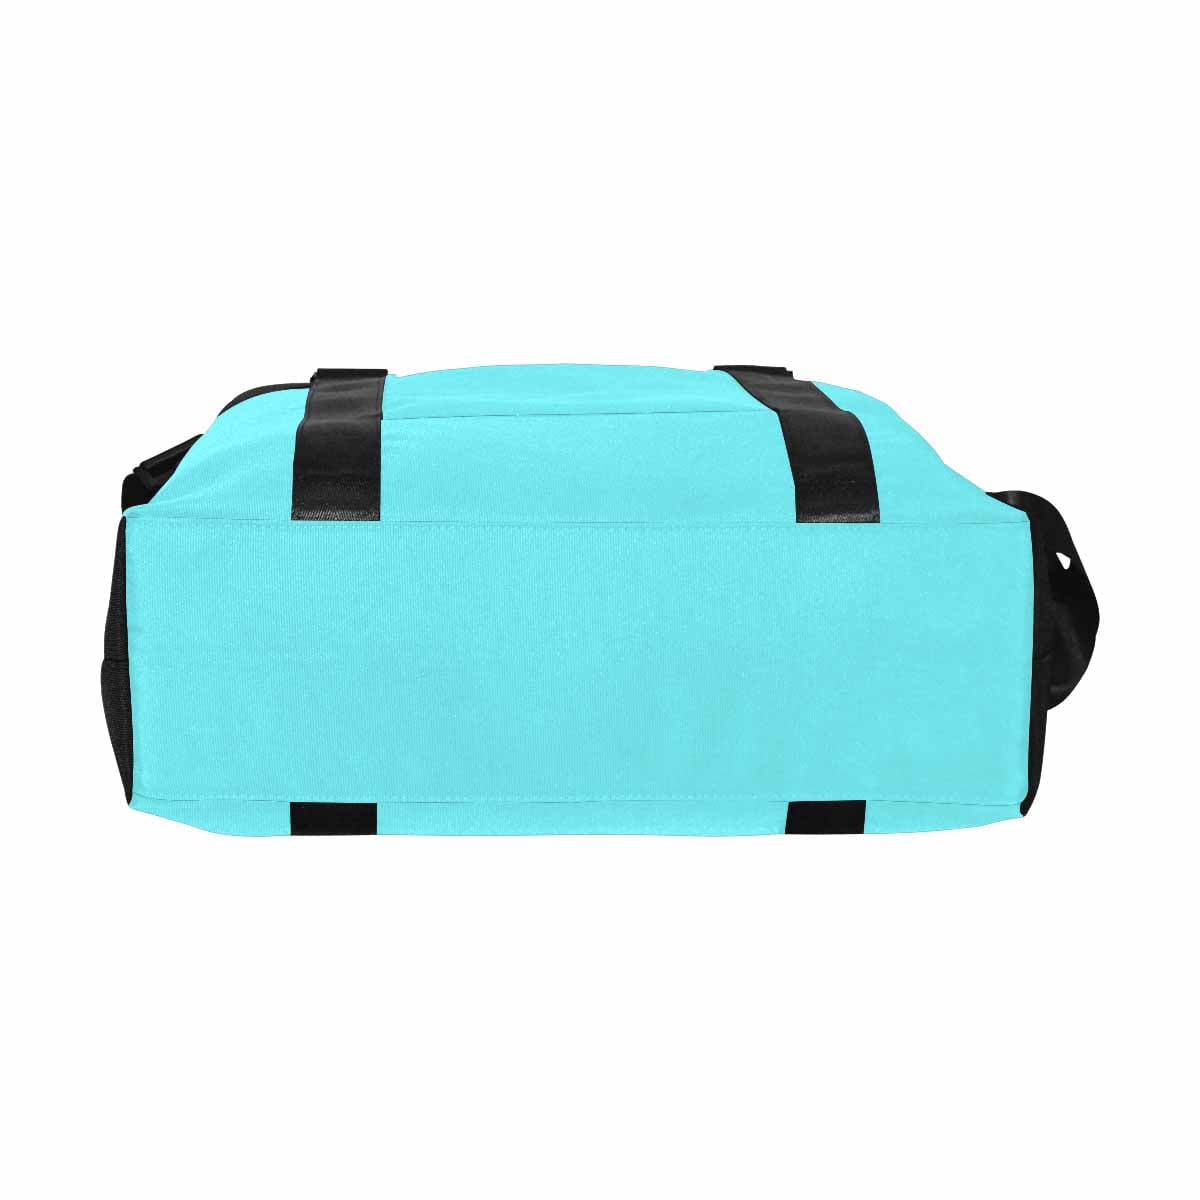 Electric Blue Duffel Bag Large Travel Carry On - Bags | Duffel Bags